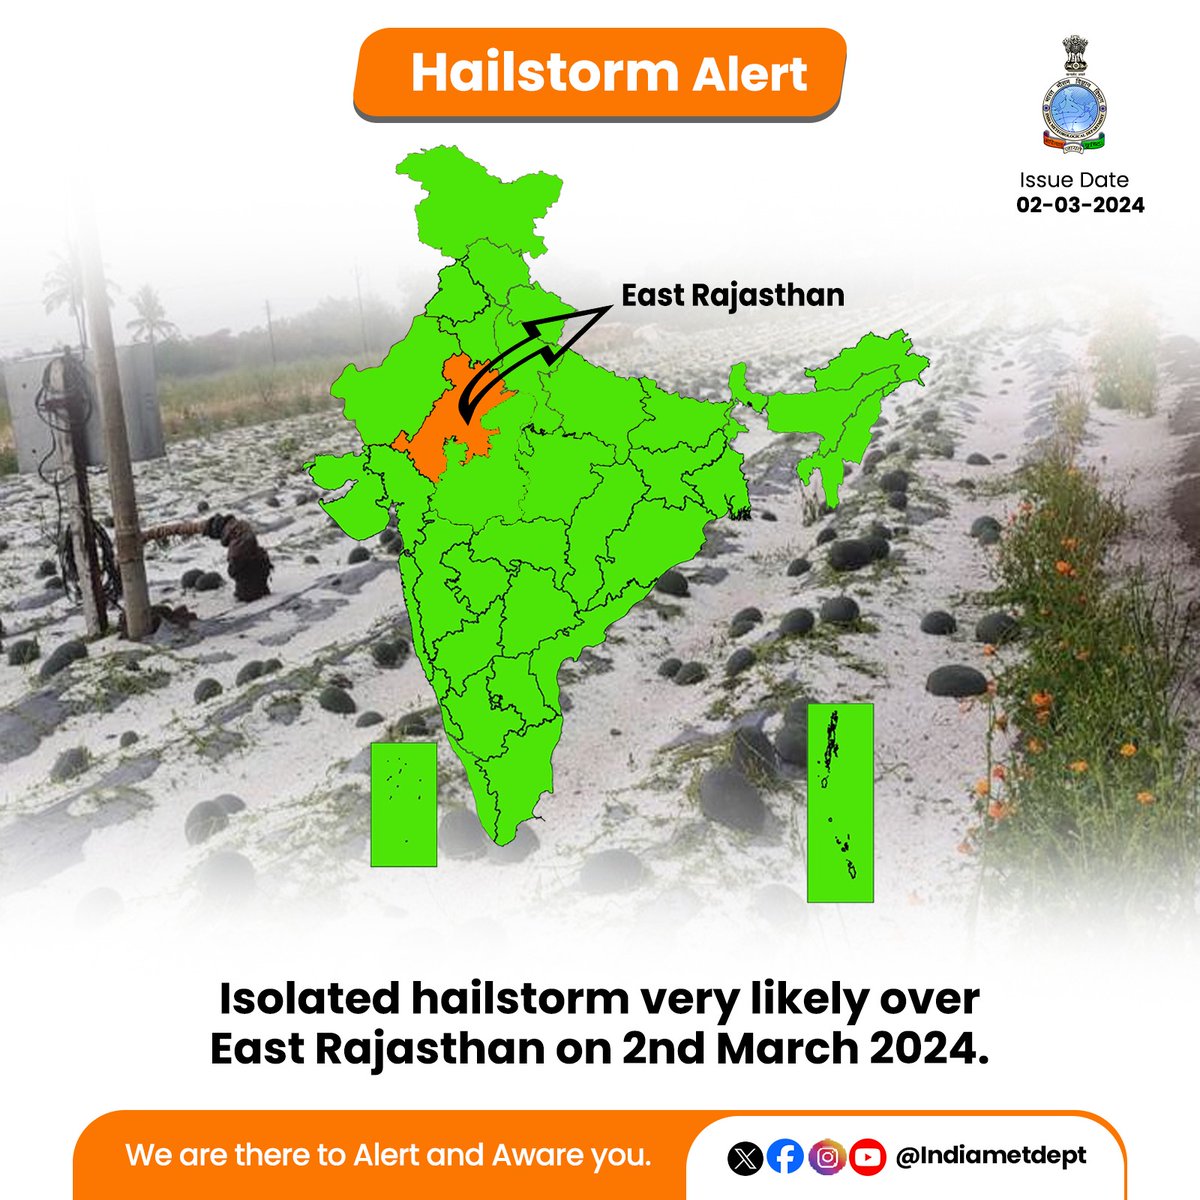 Isolated hailstorm very likely over East Rajasthan on 2nd March 2024.

#RajasthanWeather #HailstormAlert 

@moesgoi
@DDNewslive
@ndmaindia
@airnewsalerts